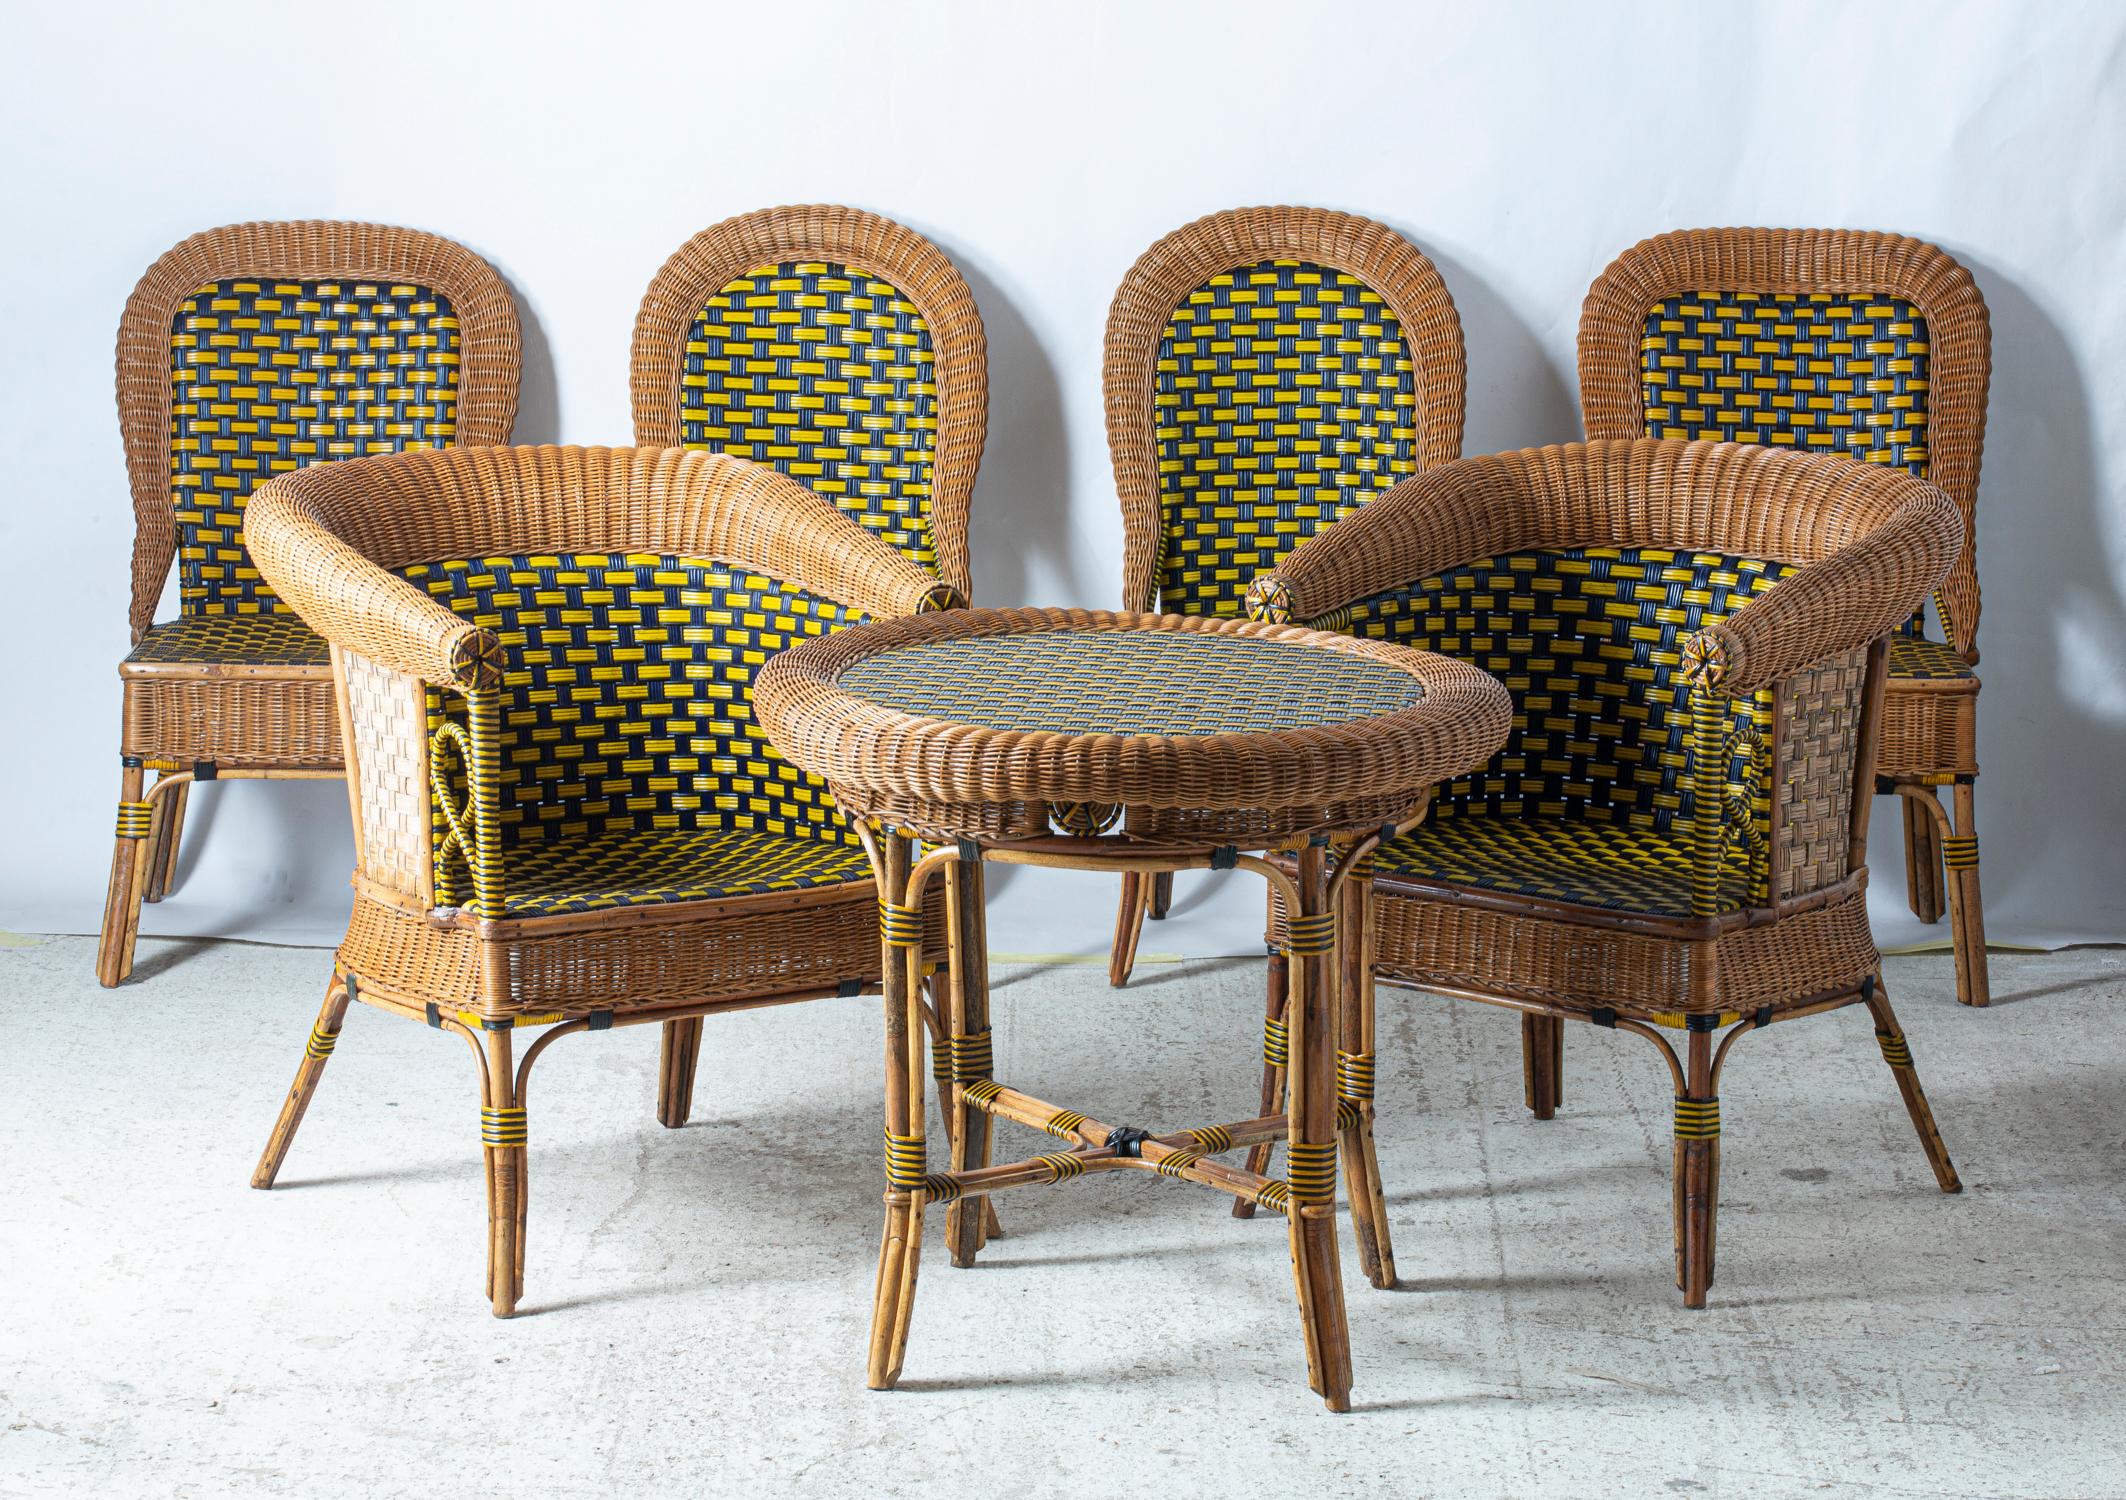 Beautiful set of winter garden furniture consisting of two armchairs, four chairs and a table, made in France in the 1925s. 
Blue and yellow lacquered rattan and natural rattan mixed together in a clever weaving. 
All in excellent